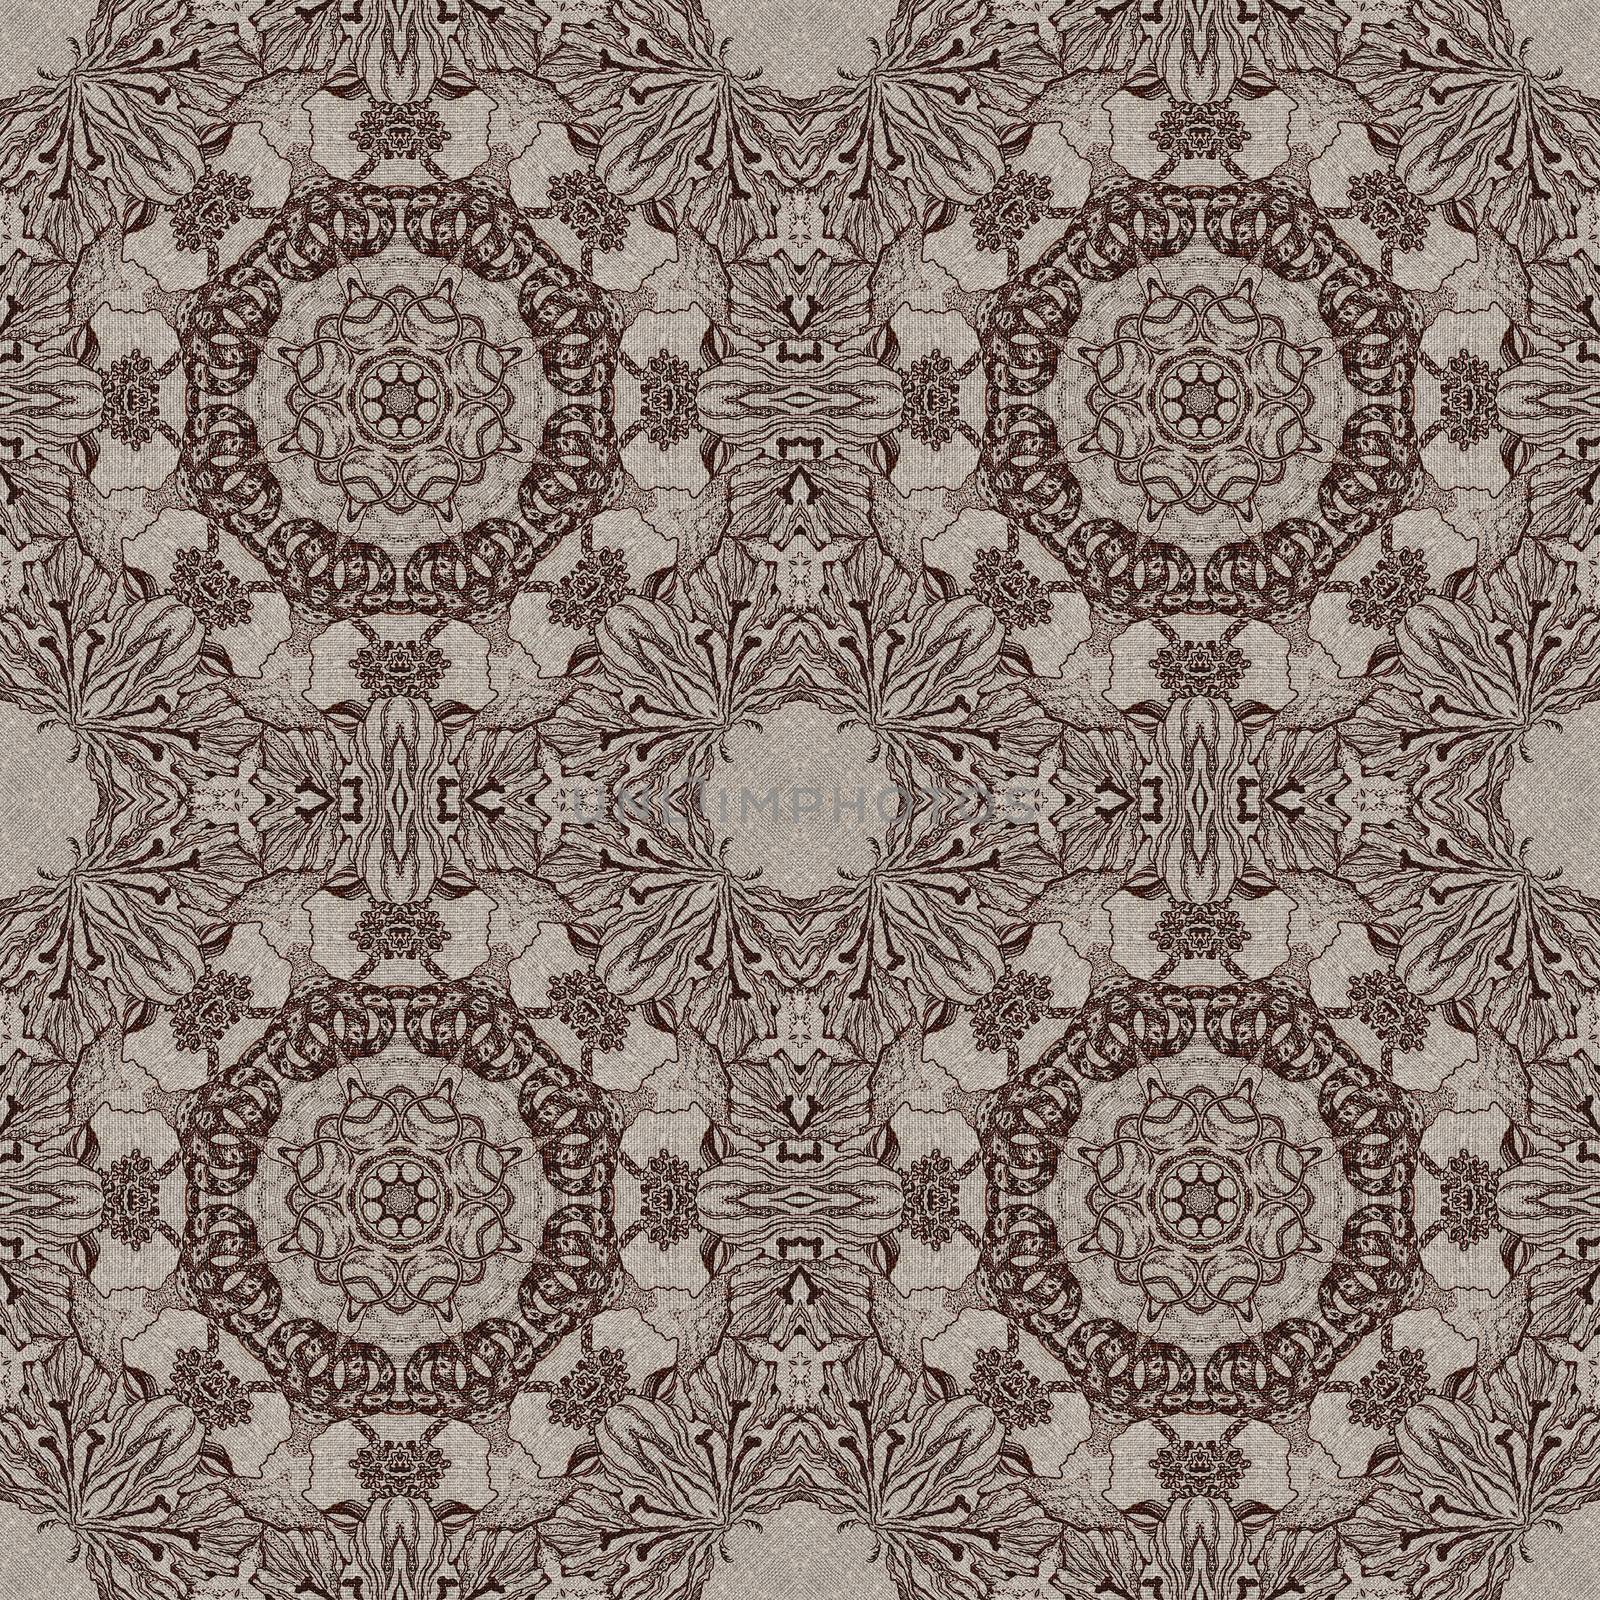 Seamless graphic pattern on canvas by alexcoolok